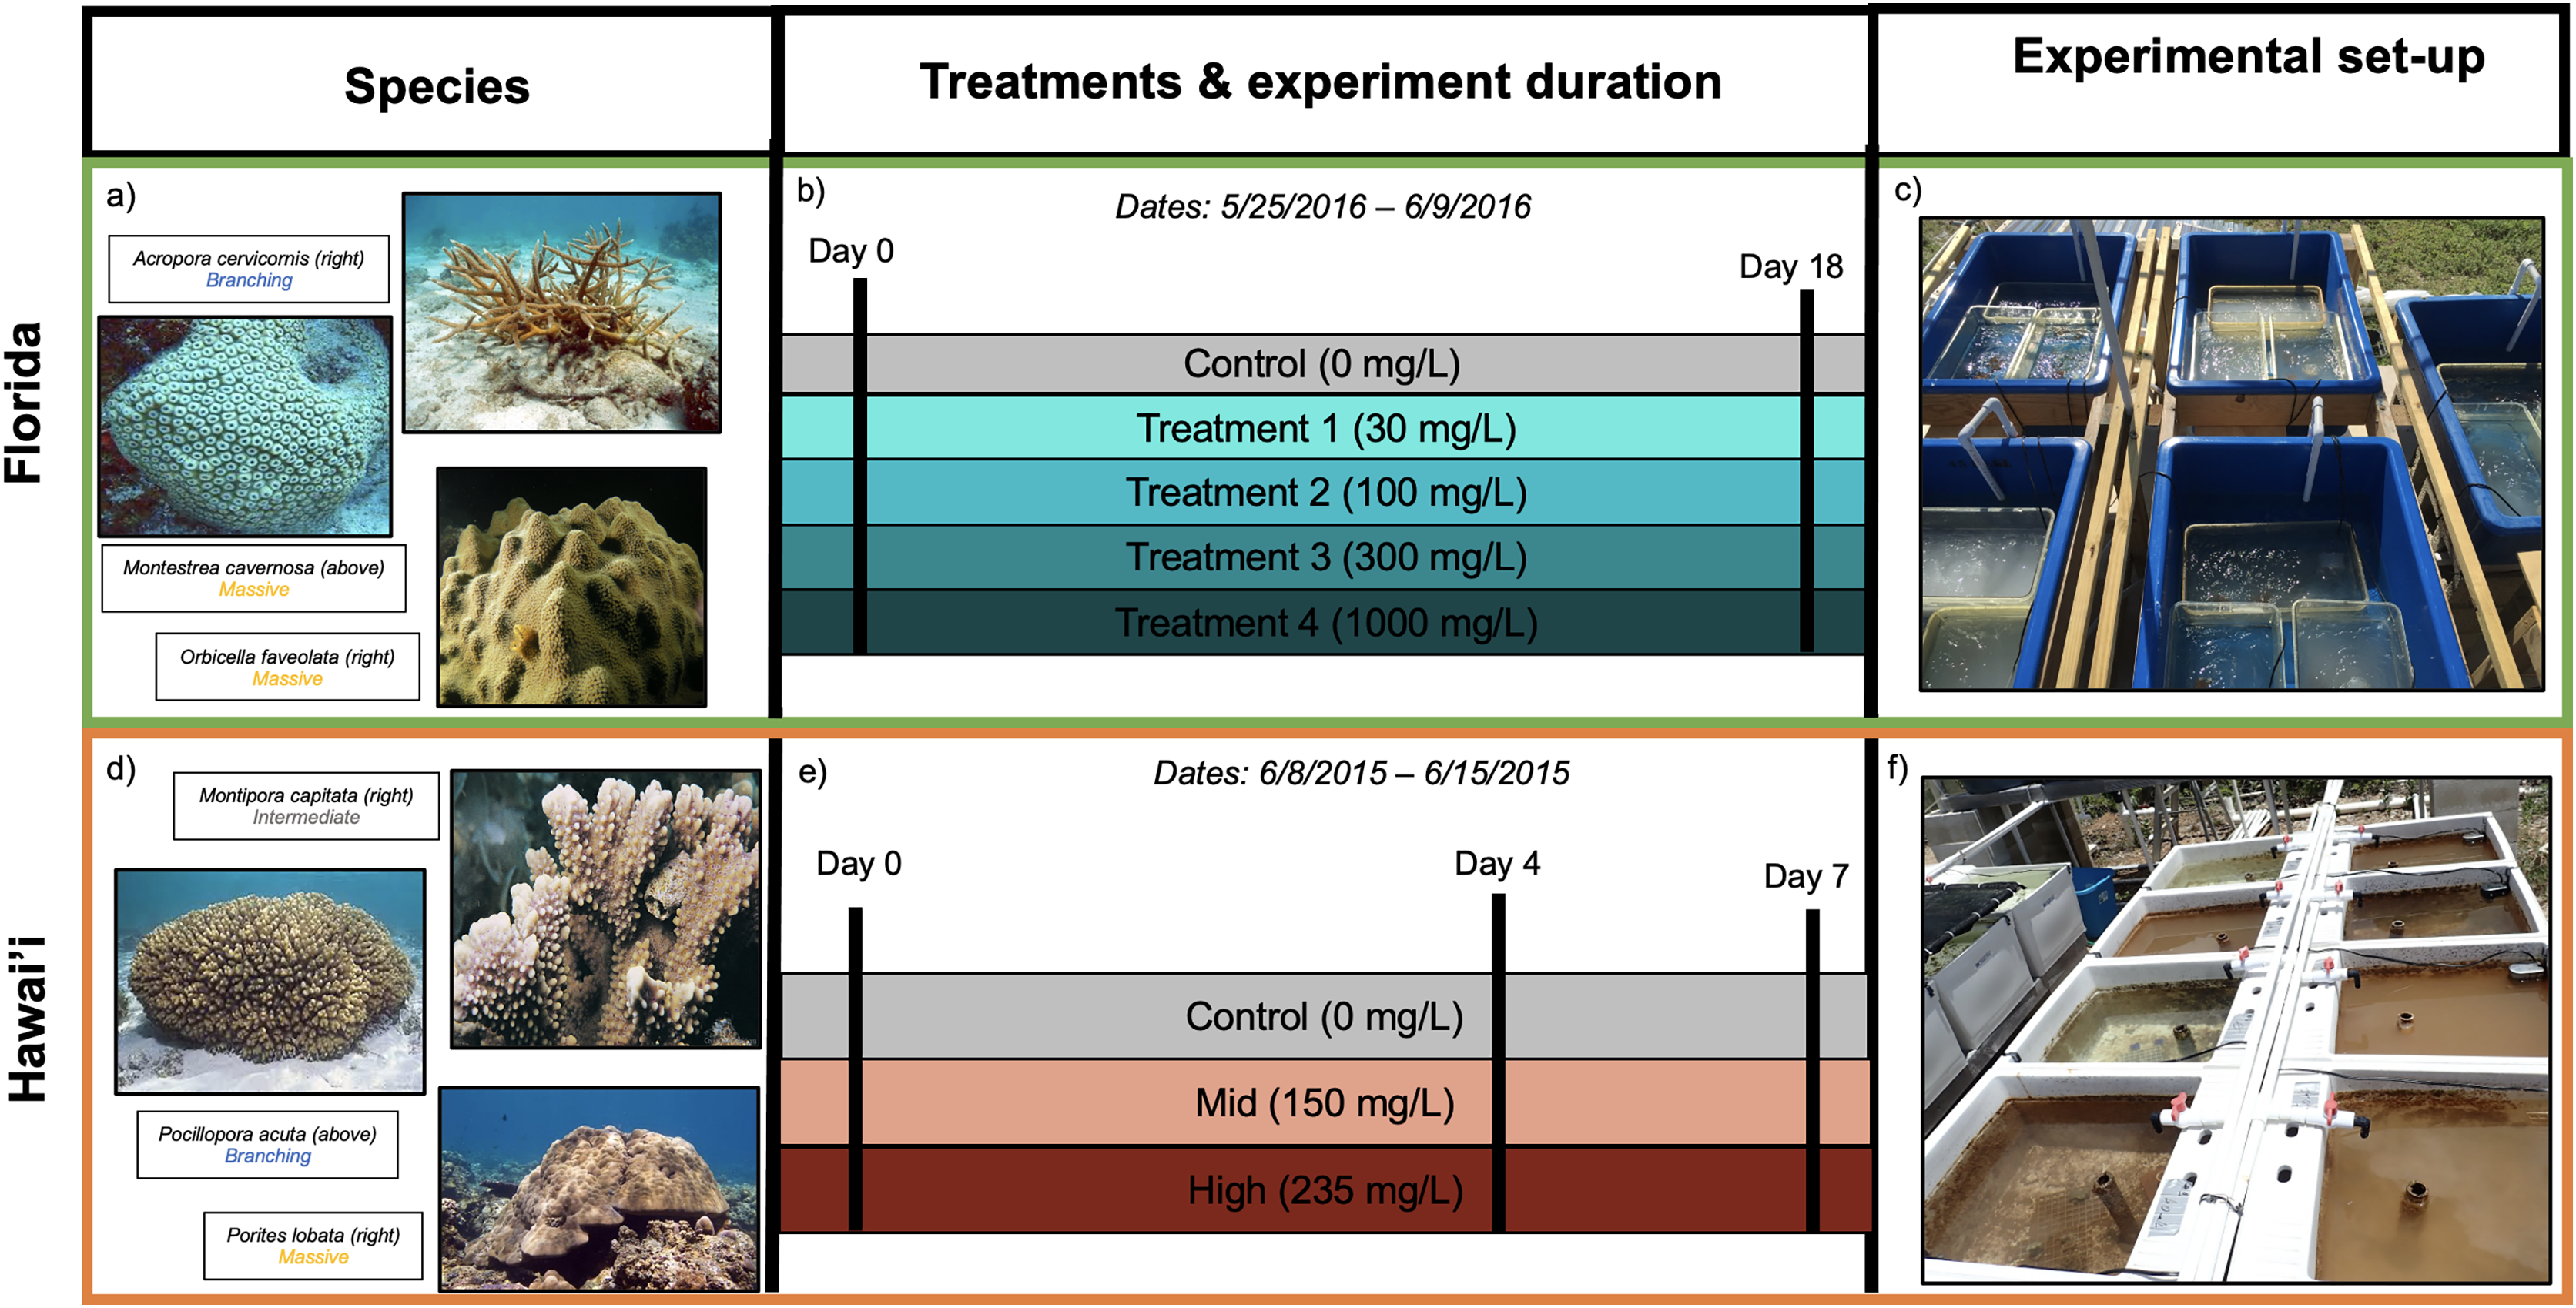 Characterizing transcriptomic responses to sediment stress across location  and morphology in reef-building corals [PeerJ]